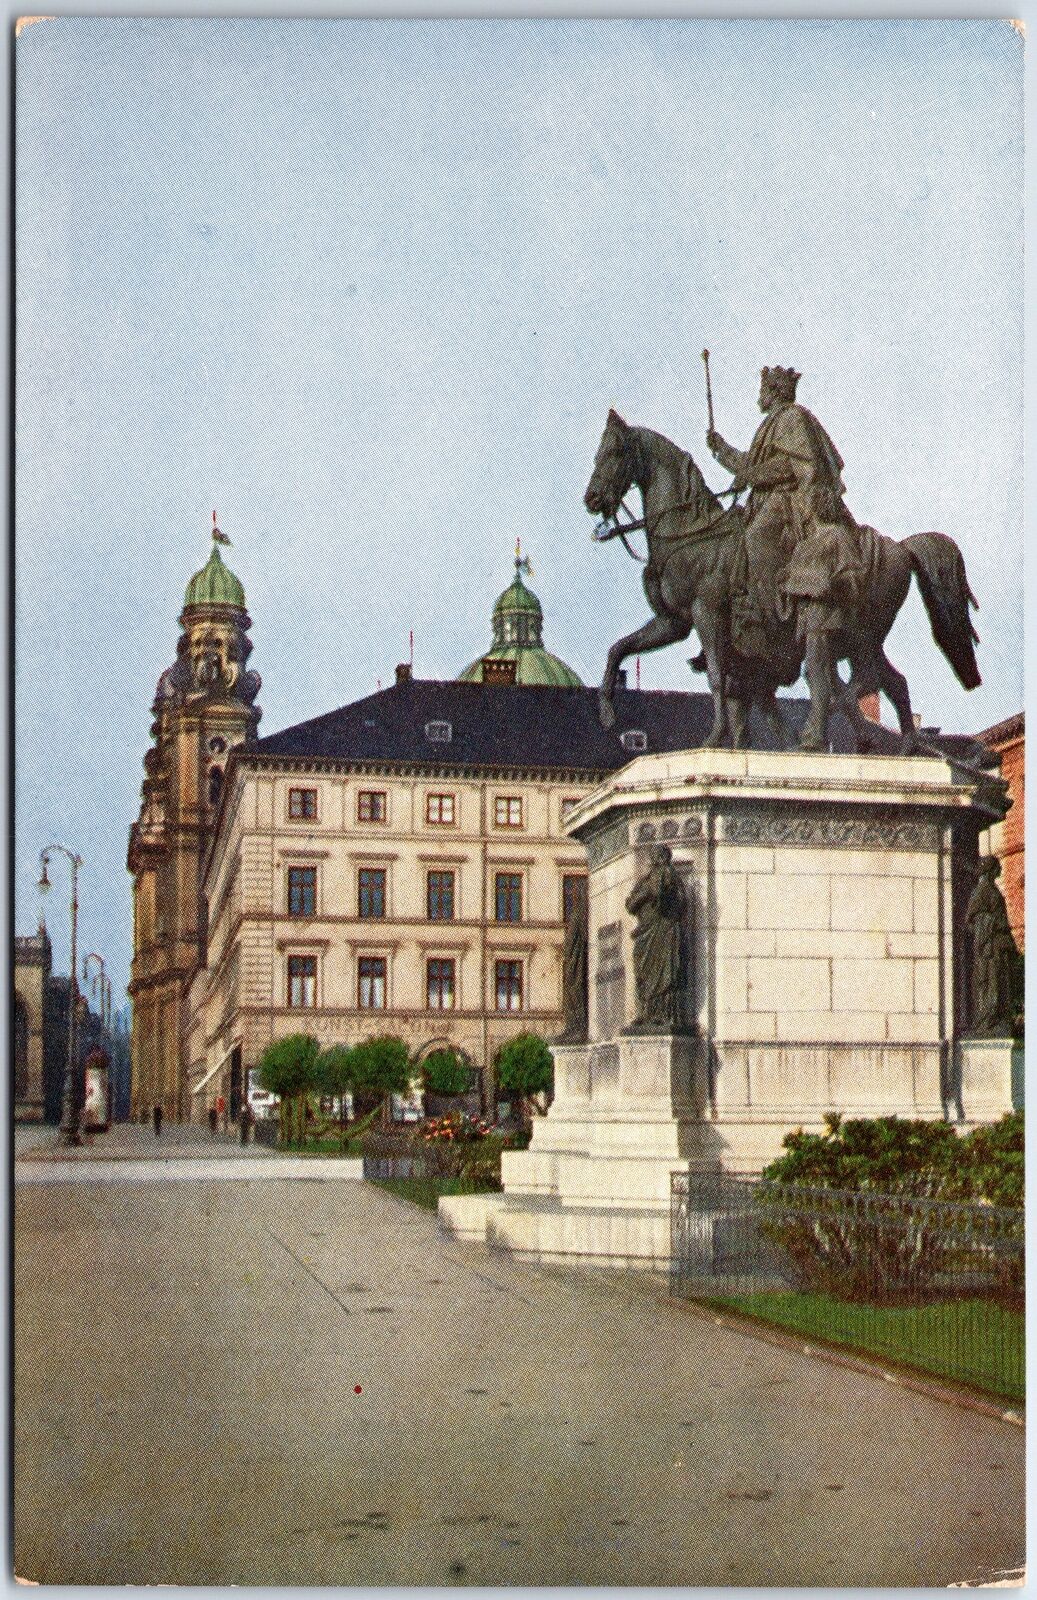 VINTAGE POSTCARD STATUE OF KING LUDWIG I AT LUDWIGSTRASSE MUNICH GERMANY 1910s